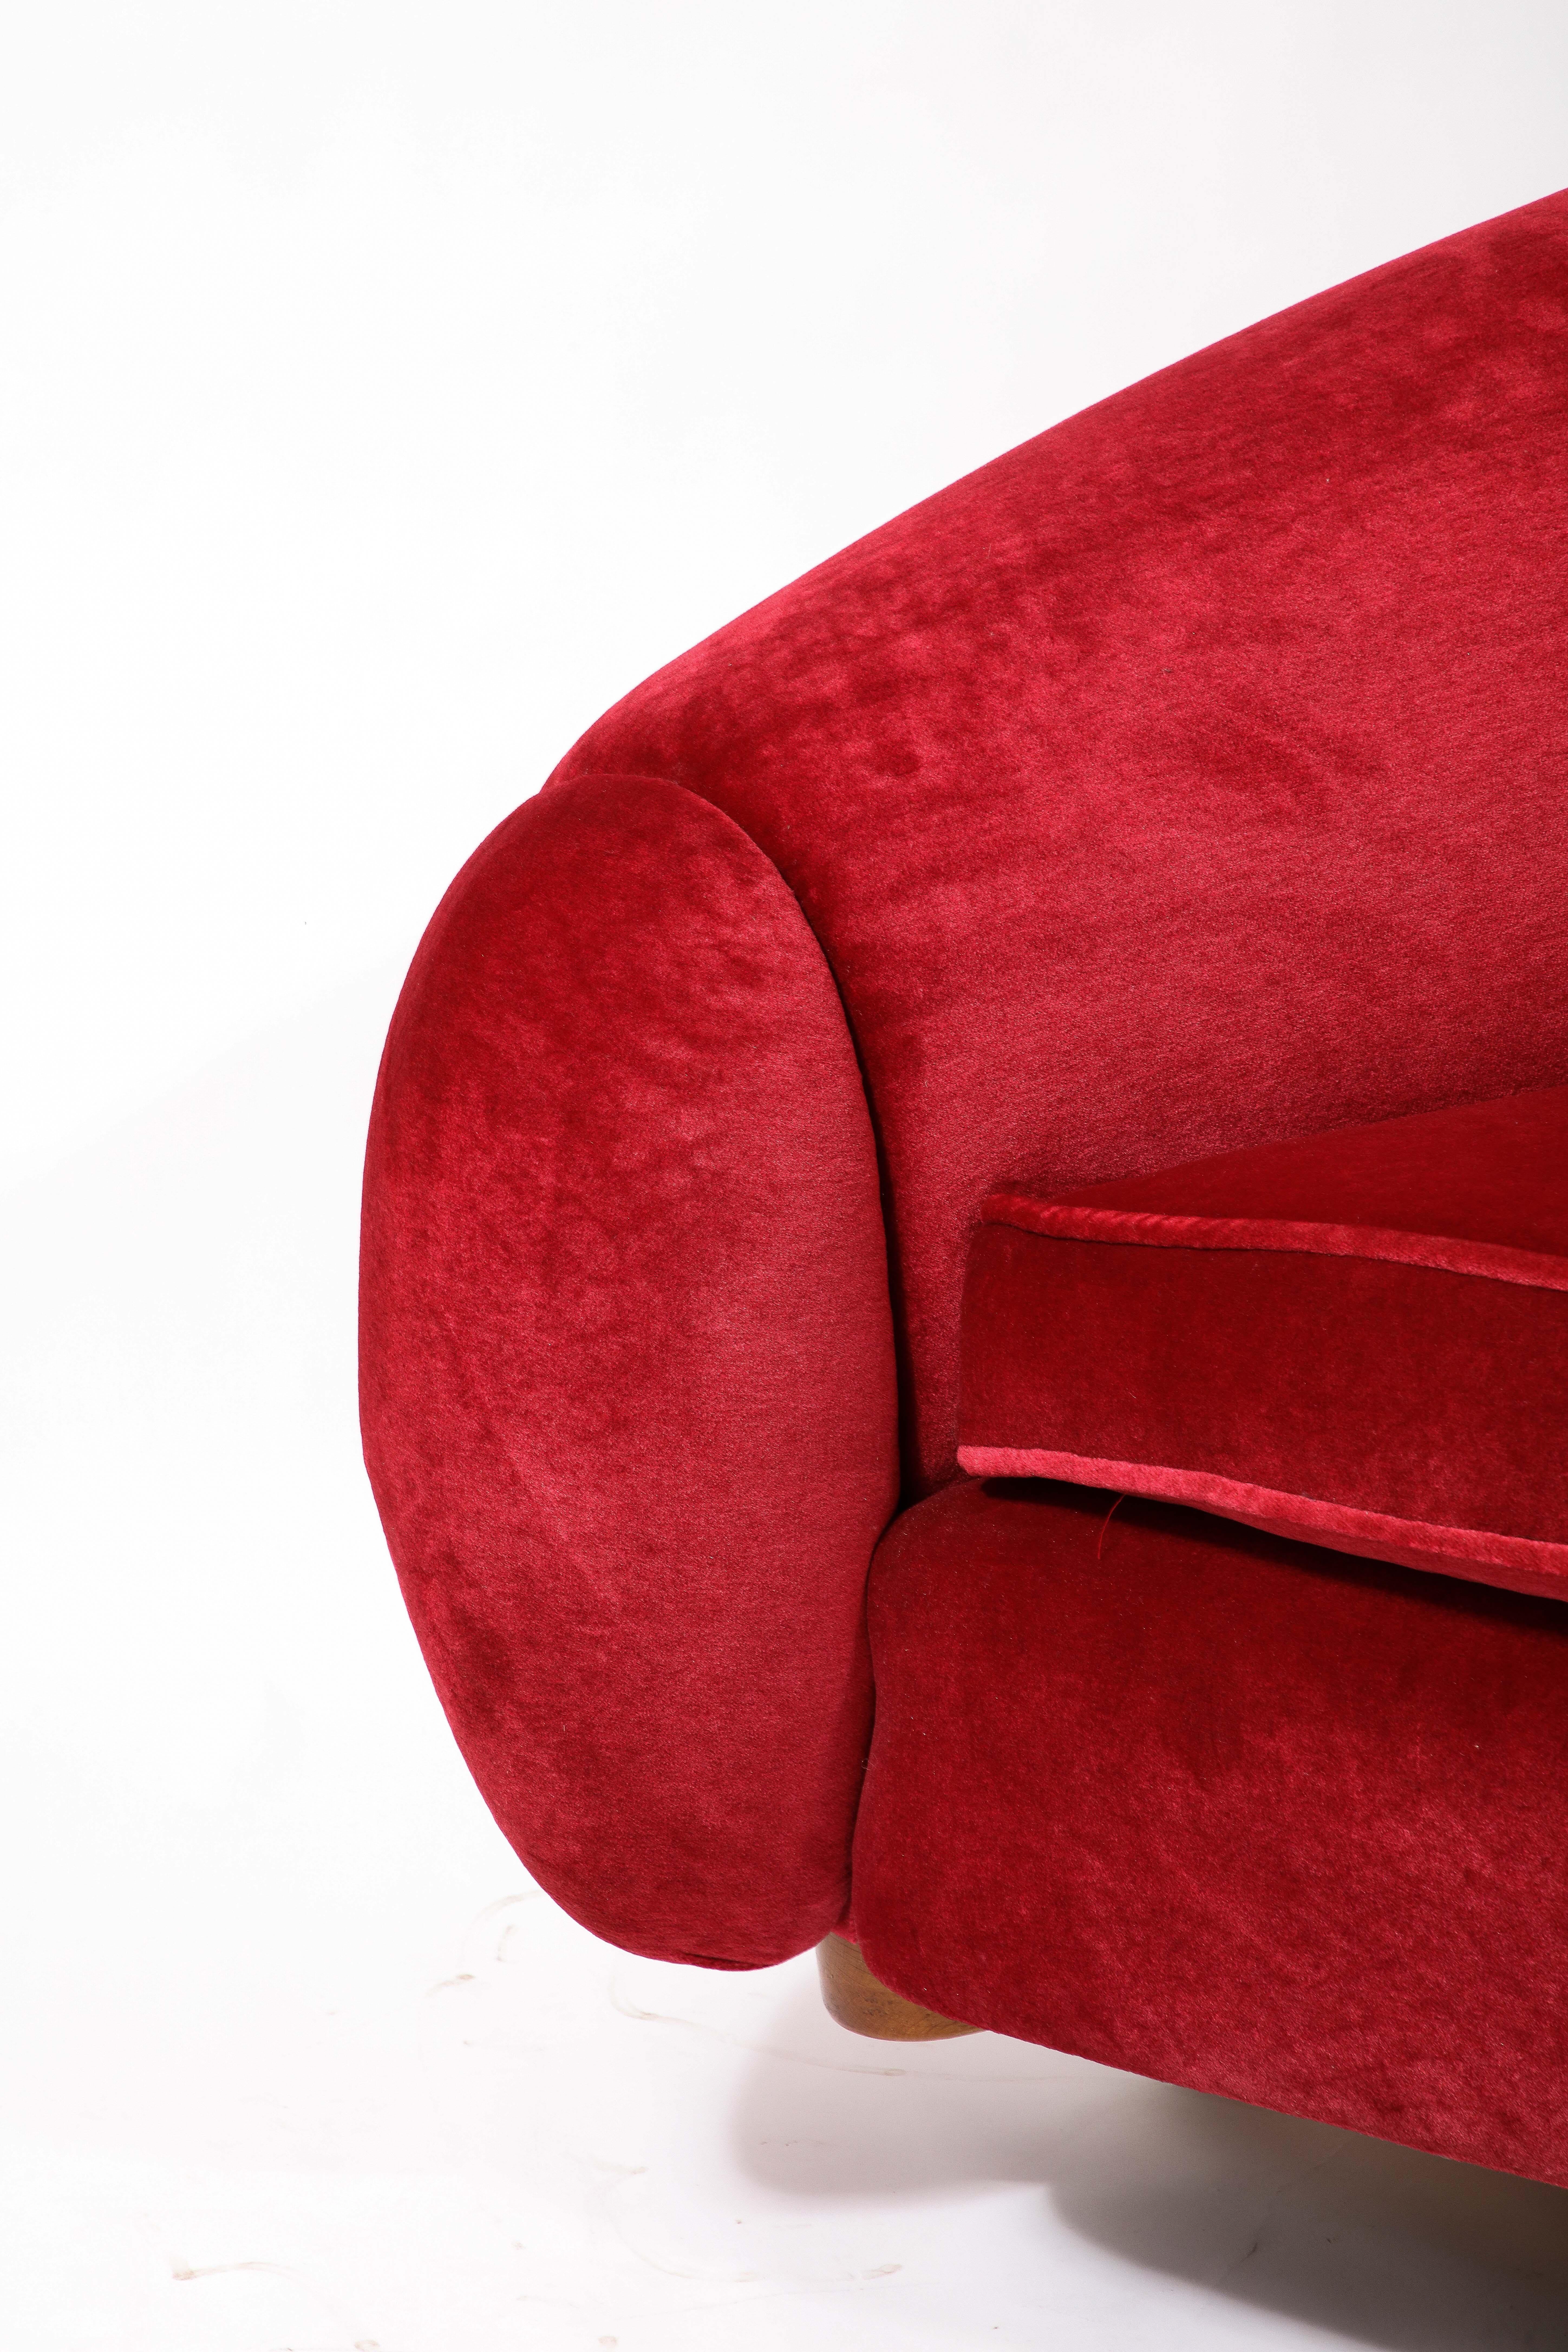 Jean Royère Style Boule Sofa  in Red Mohair, France 1980's 2